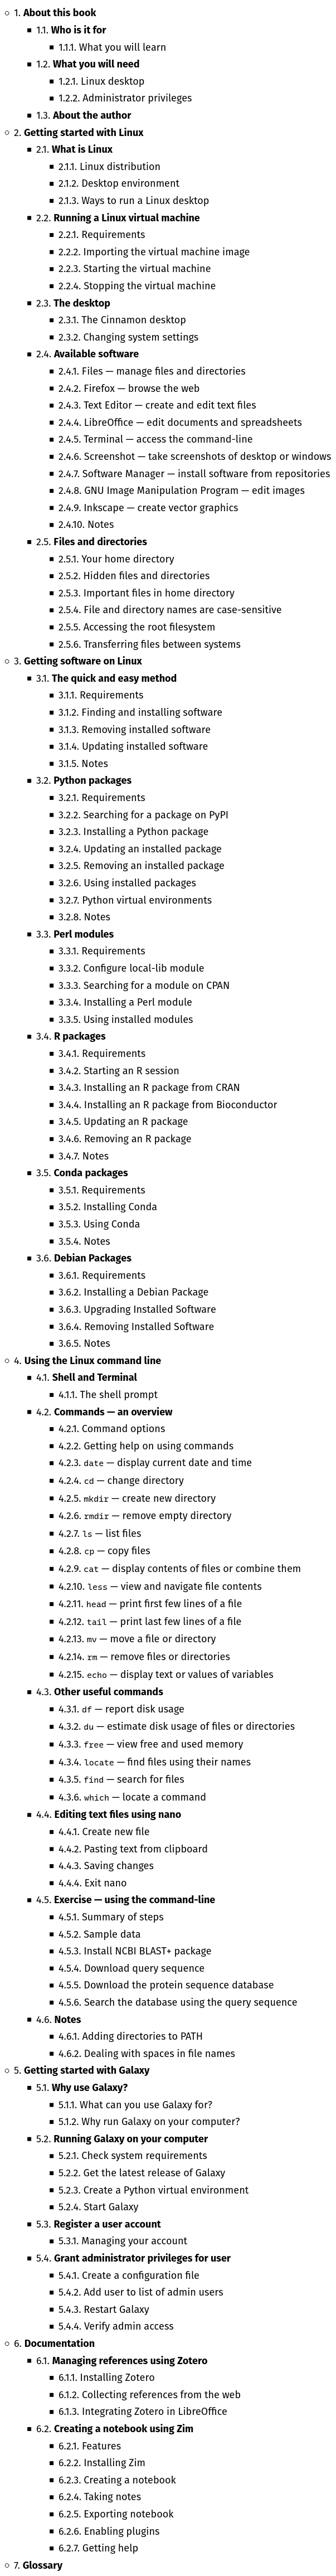 Linux for Biologists - Table of contents